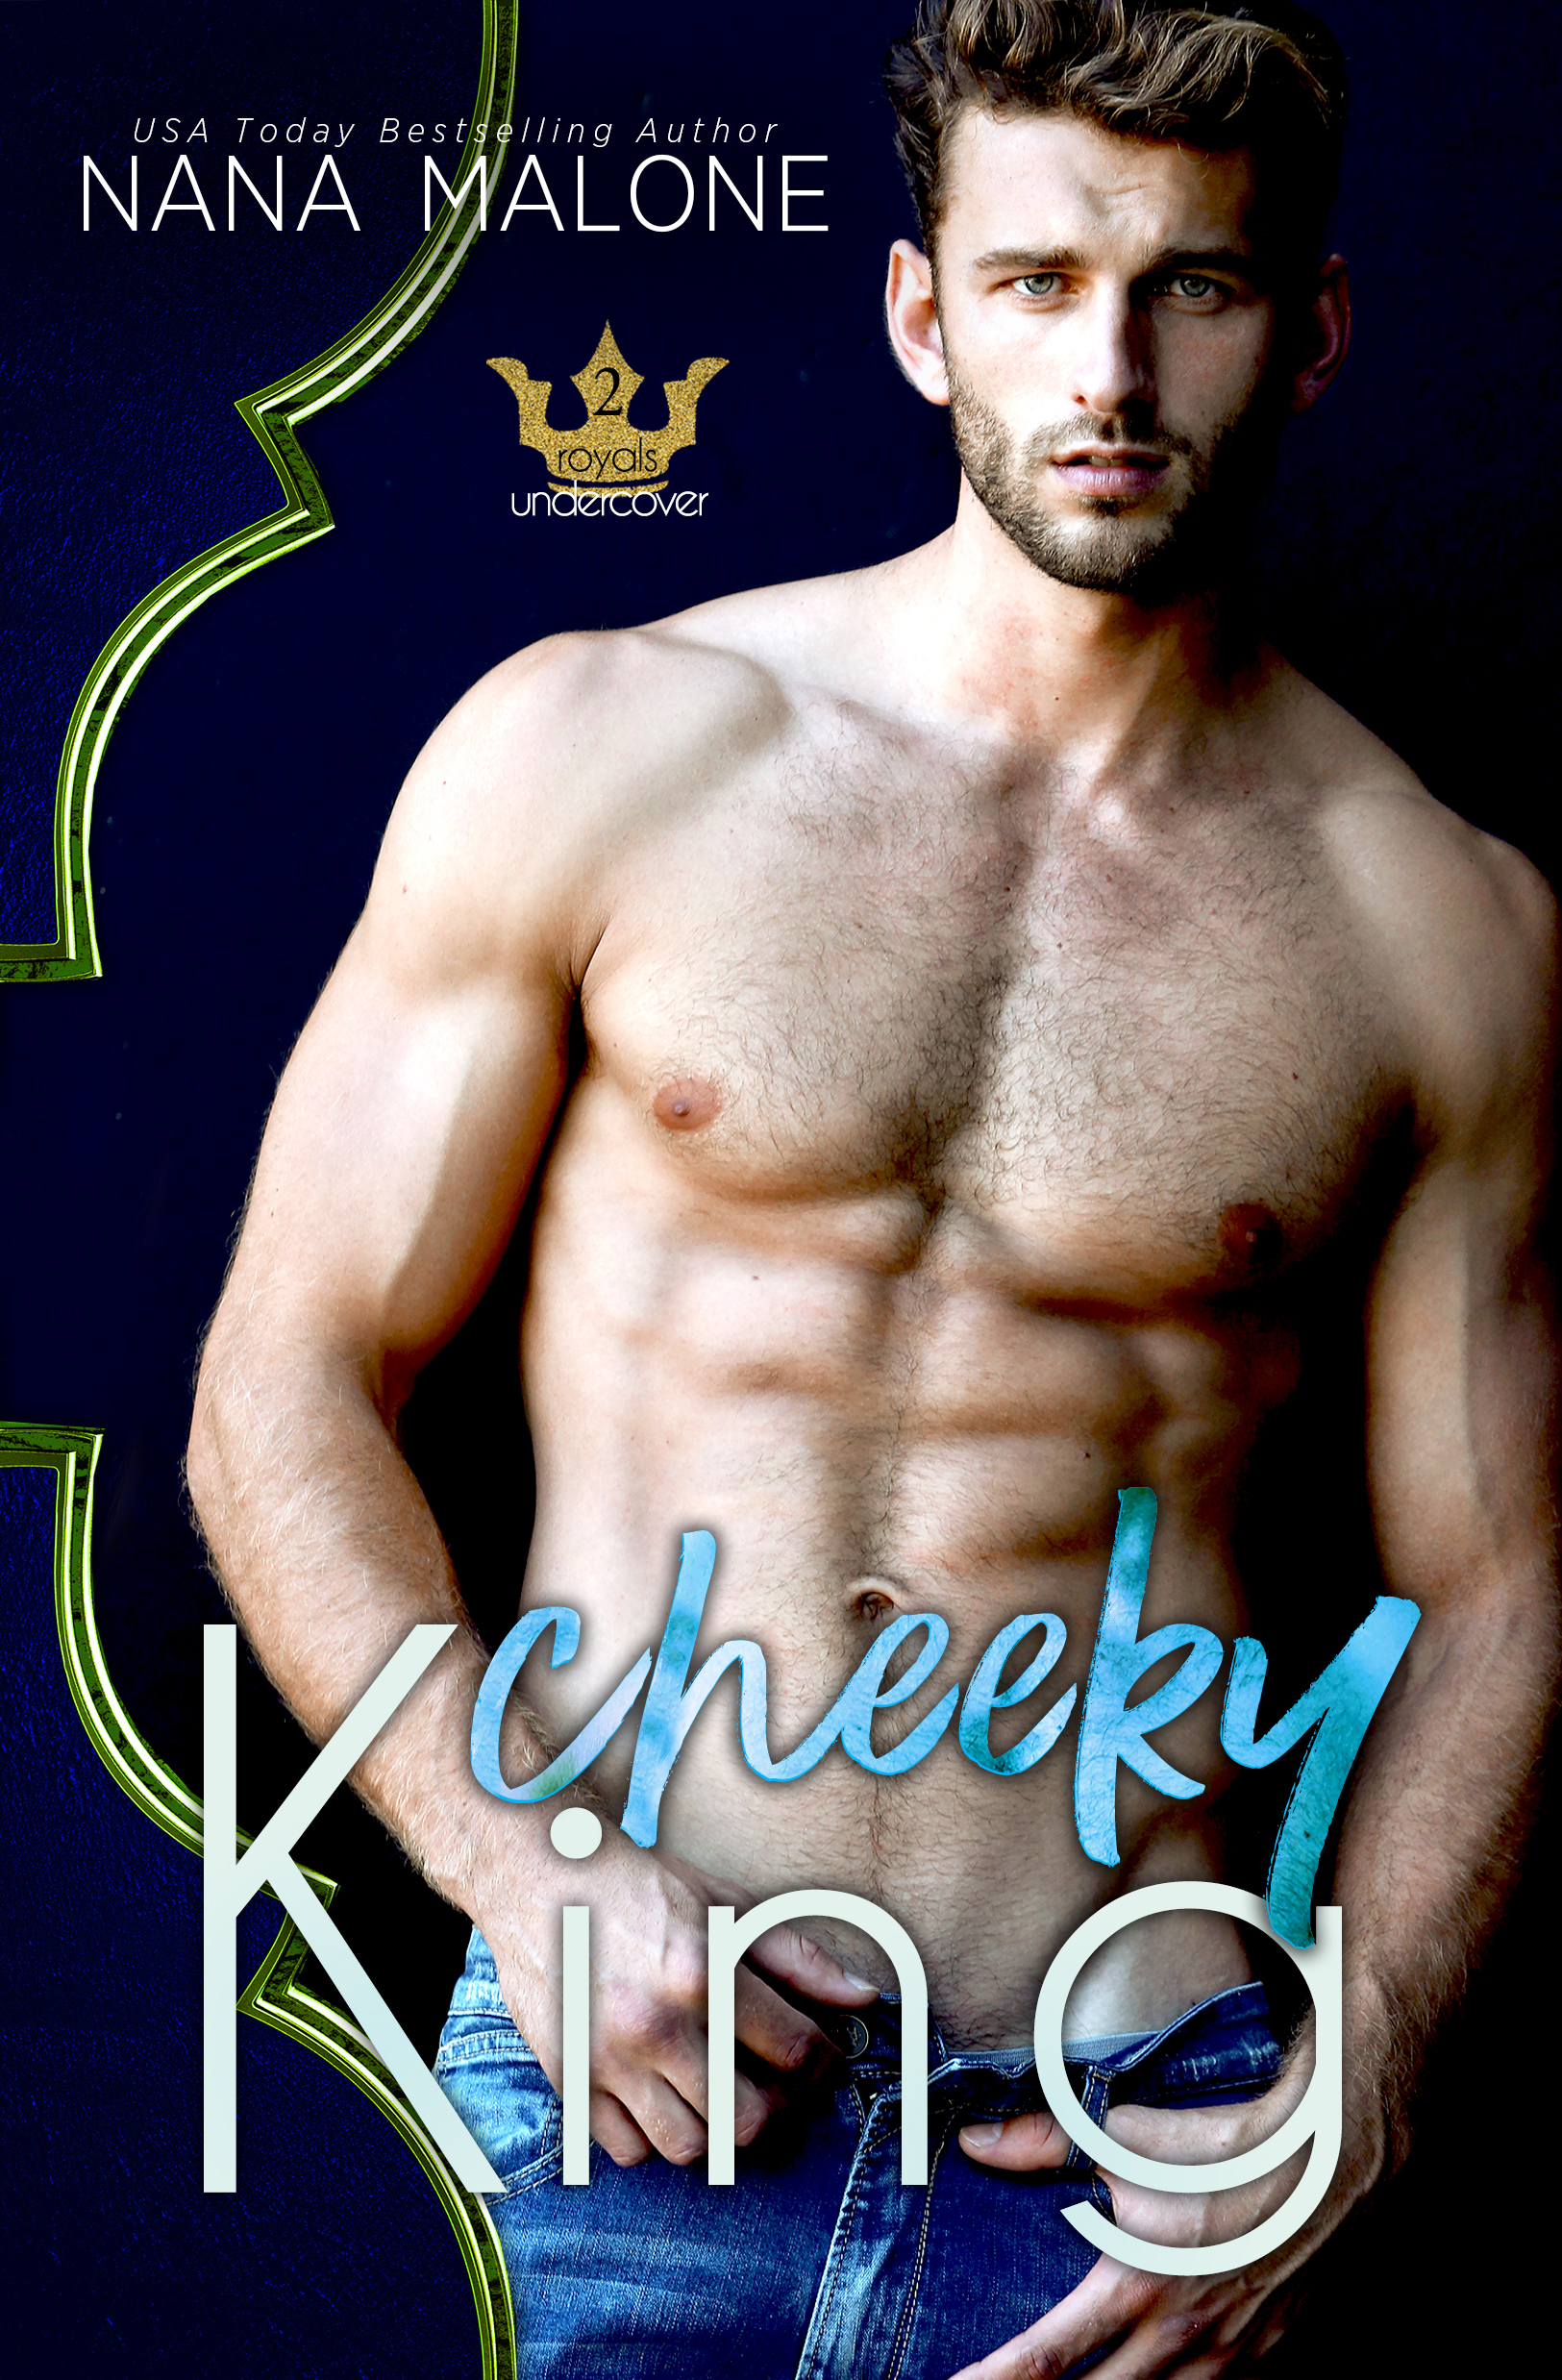 Cheeky King-FRONT